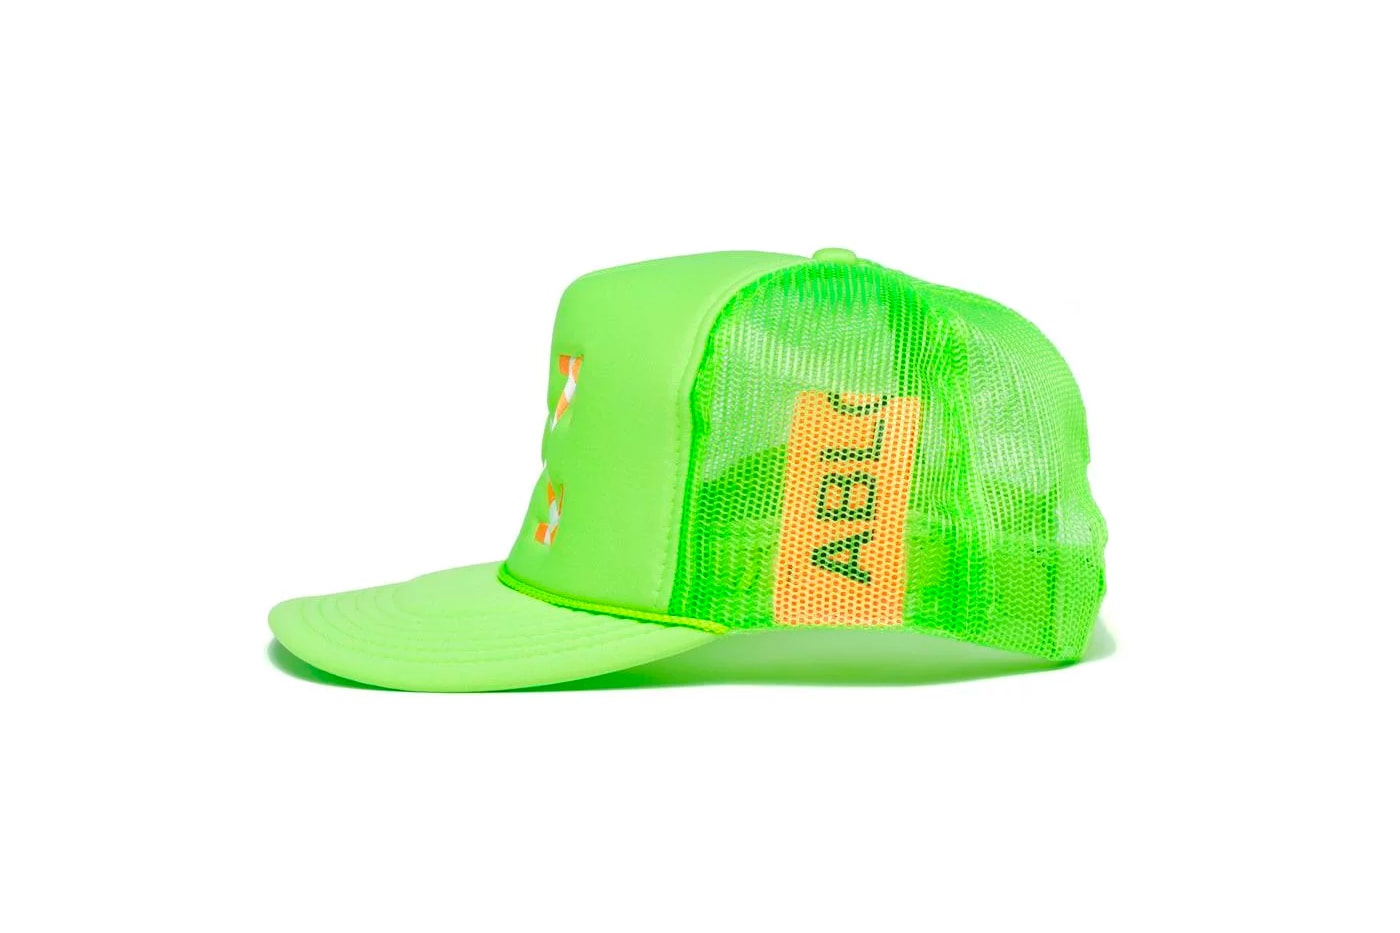 MCA Chicago Virgil Abloh Neon-Colored Apparel off white pyrex figures of speech exhibition hats t-shirts price drop info 